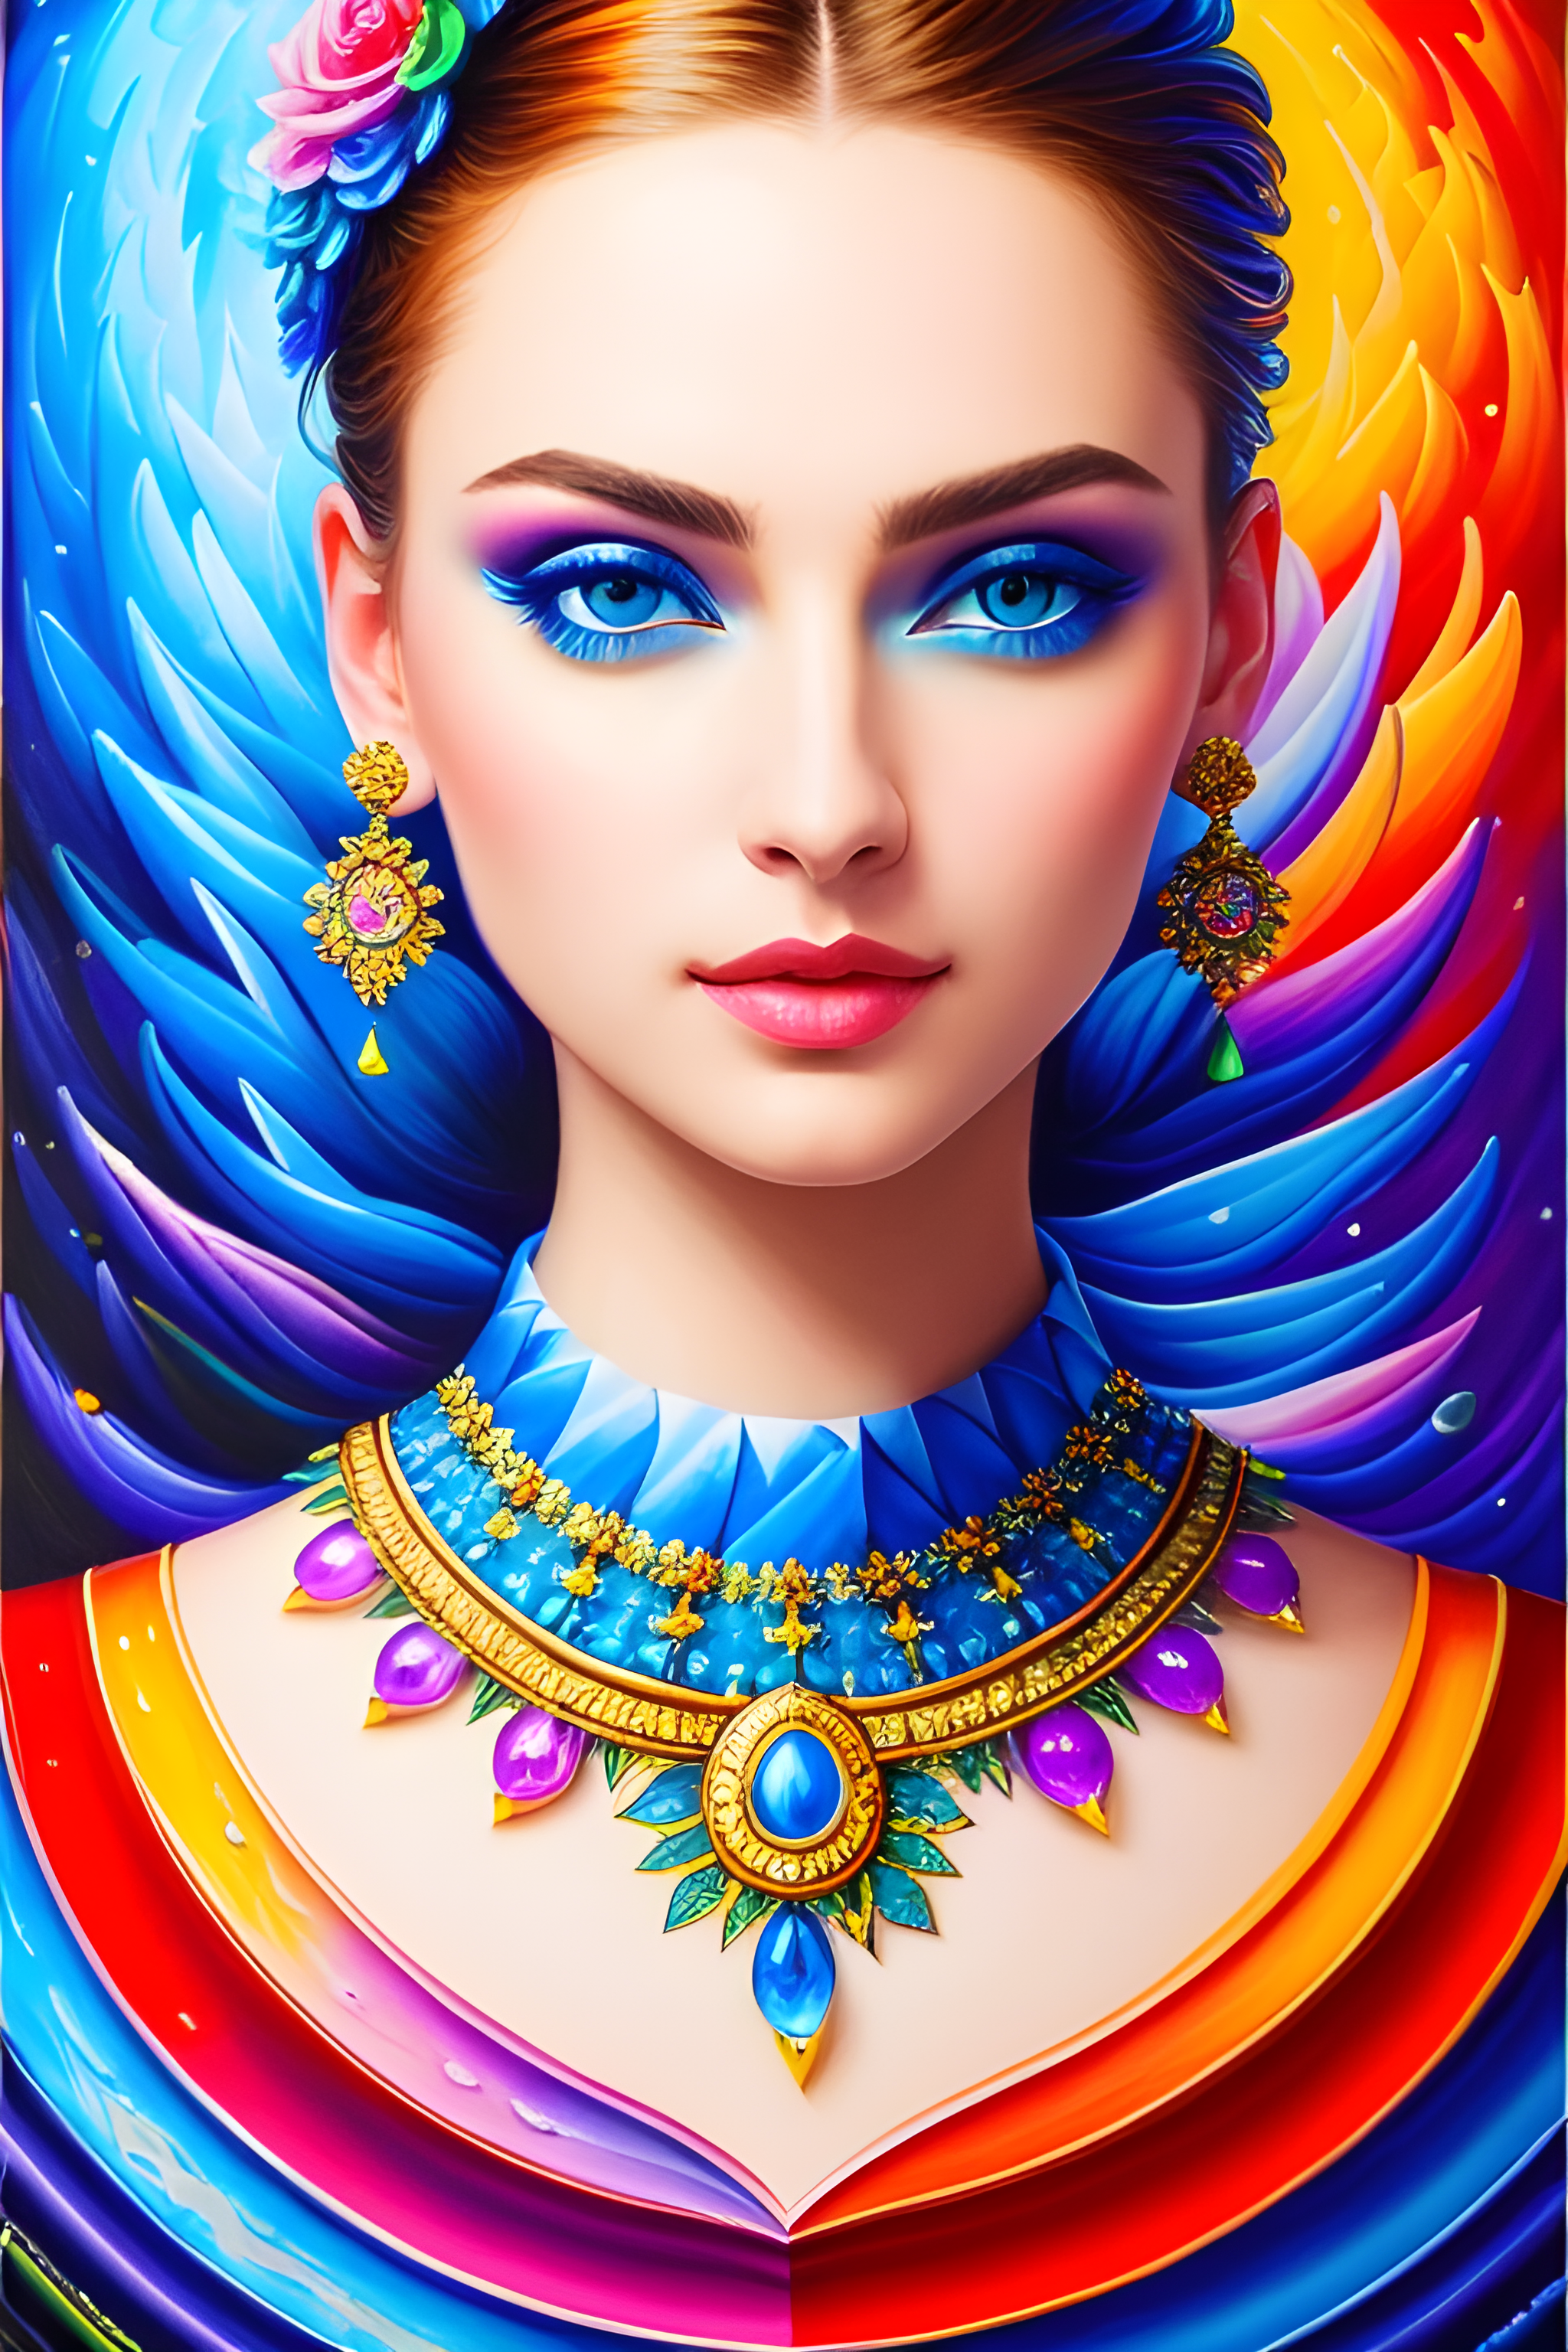 The colorful image of a beautiful woman with detailed acrylic painting